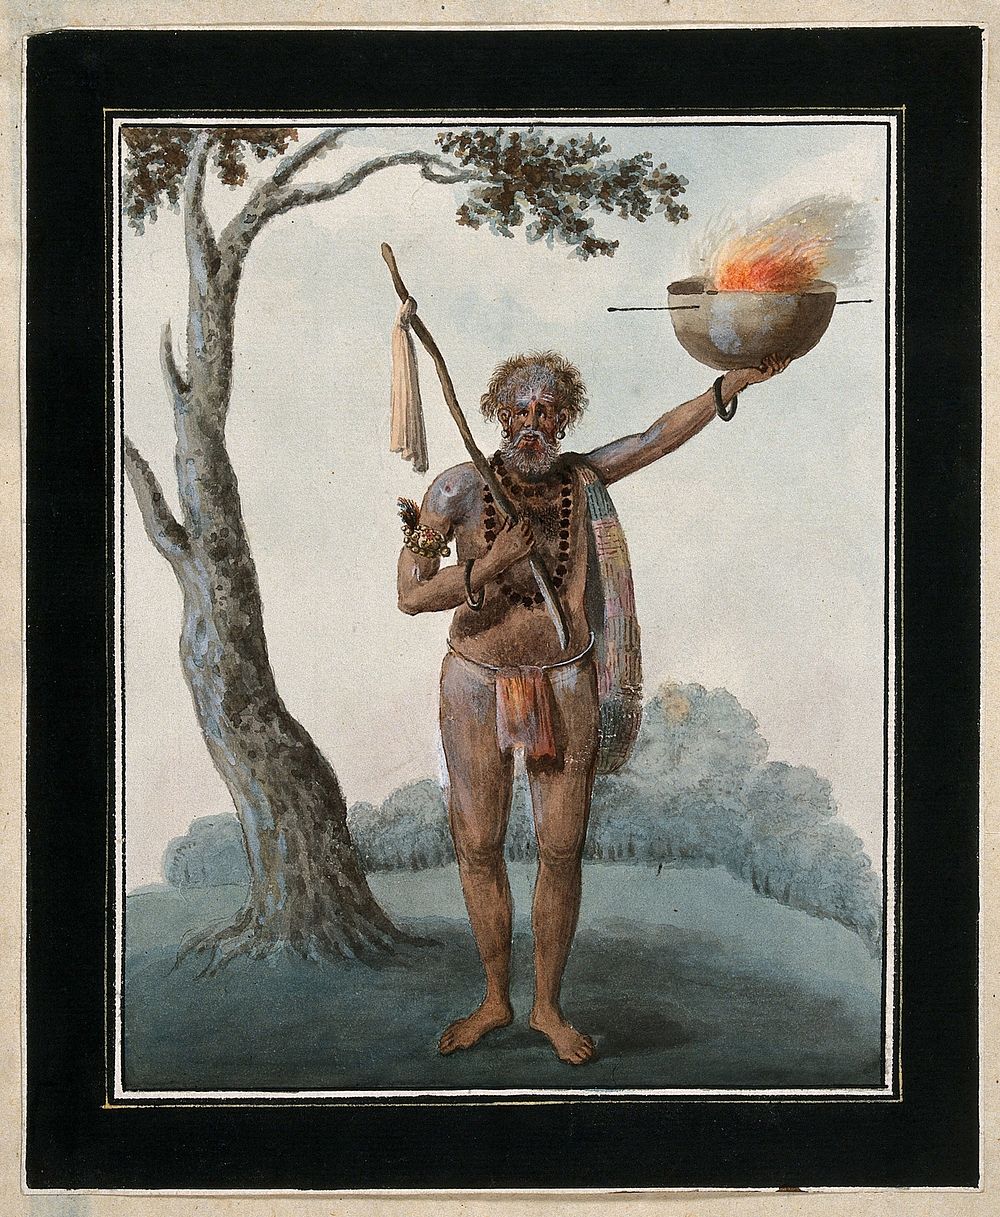 A fakir (mendicant monk) or holy man, holding up a bowl of fire. Gouache painting by an Indian artist.